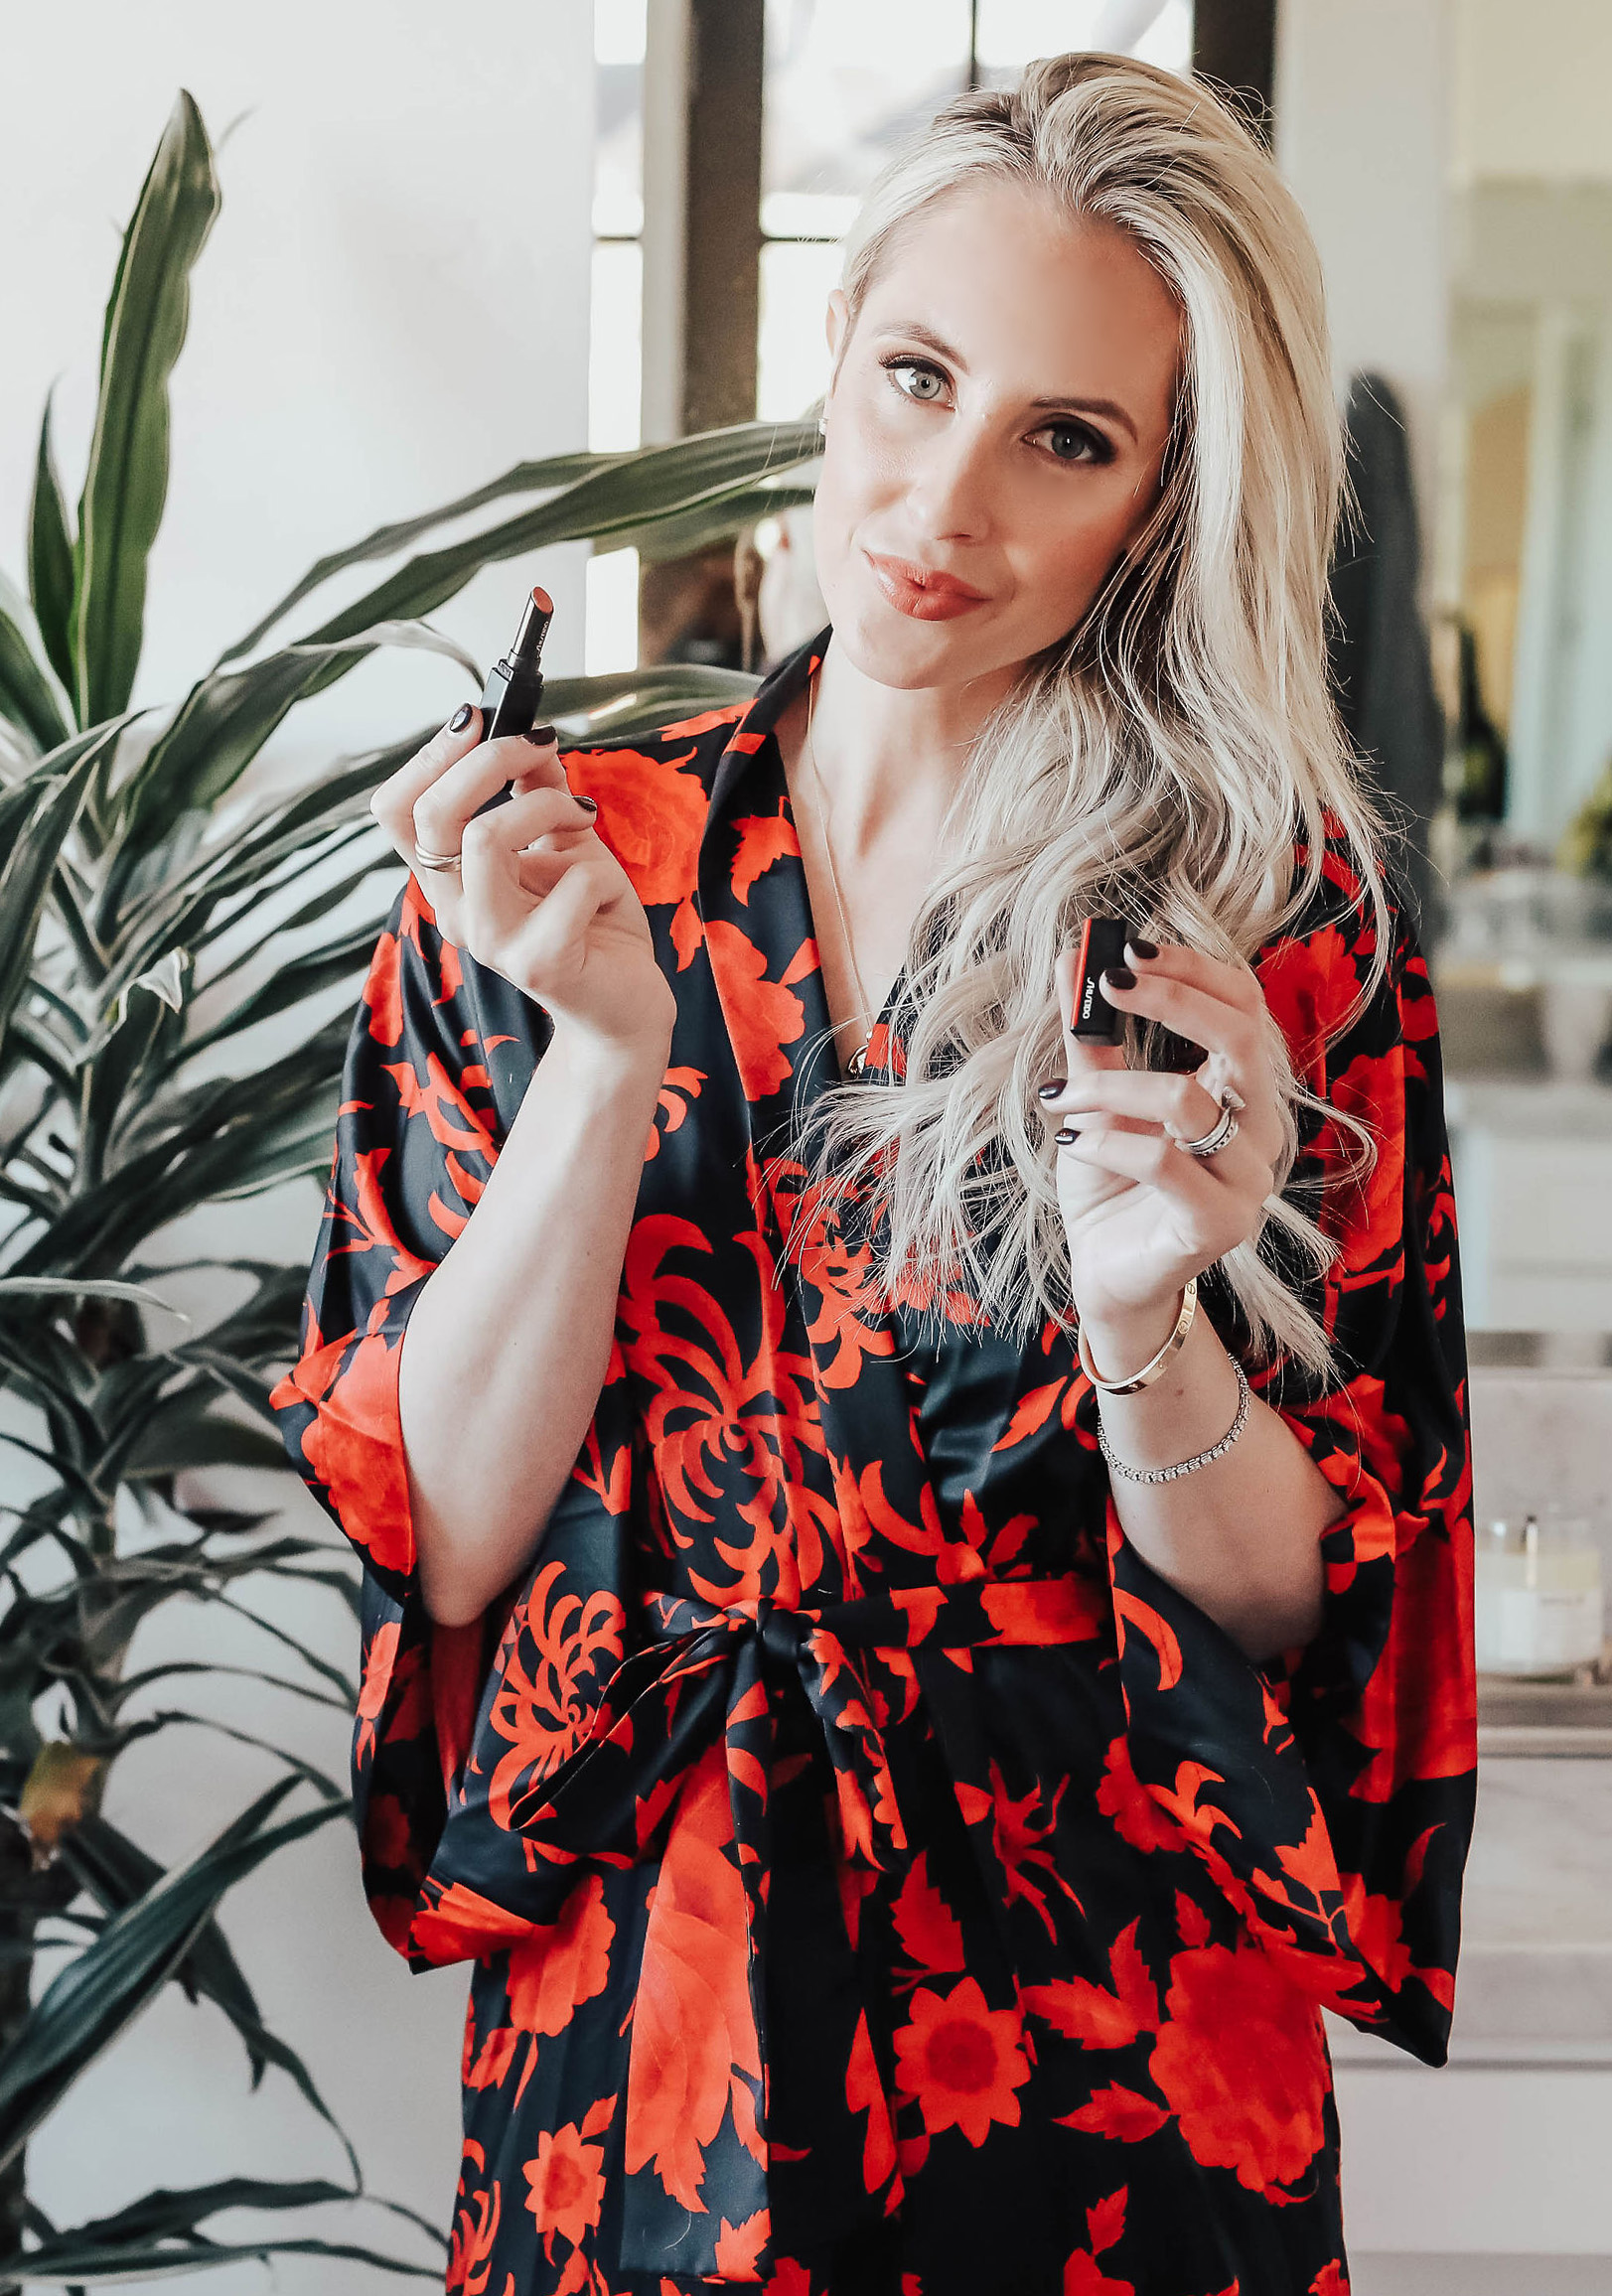 Reno Nevada Blogger, Emily Farren Wieczorek shares her love for Visionary Gel Lipstick by Shiseido and tells the story of her and Ashley's friendship.